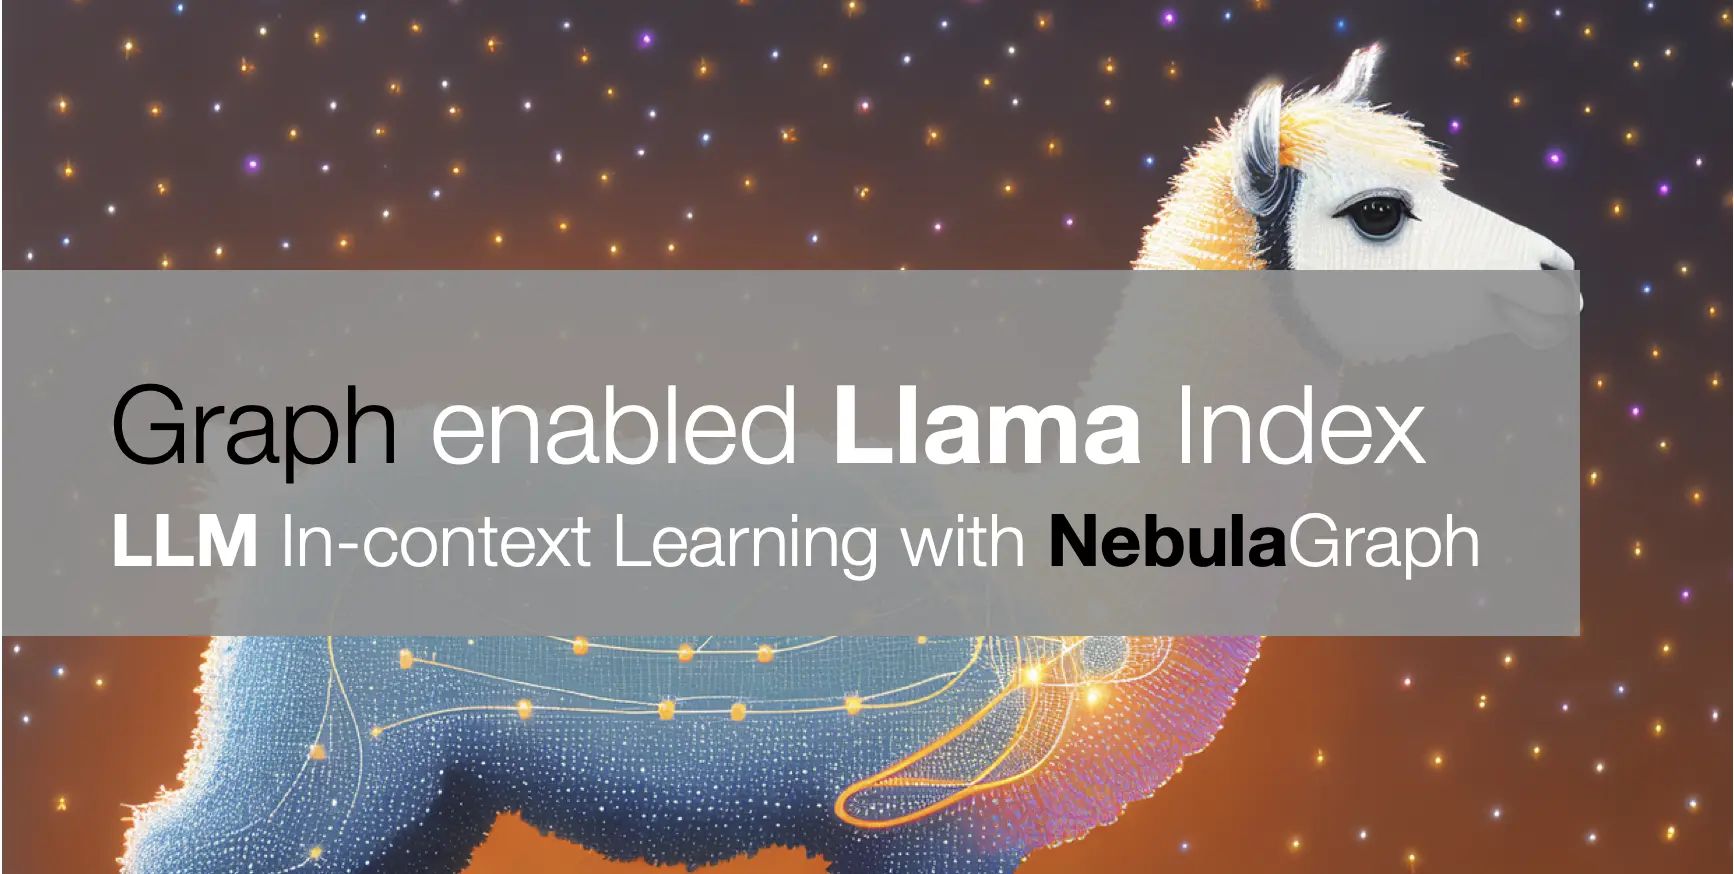 How we leverage Serverless Cloud infra to setup Data Pipeline for Nebula Graph Community Insights. We used Google Cloud Scheduler, Google Cloud Functions, BigQuery, and codes are shared in GitHub